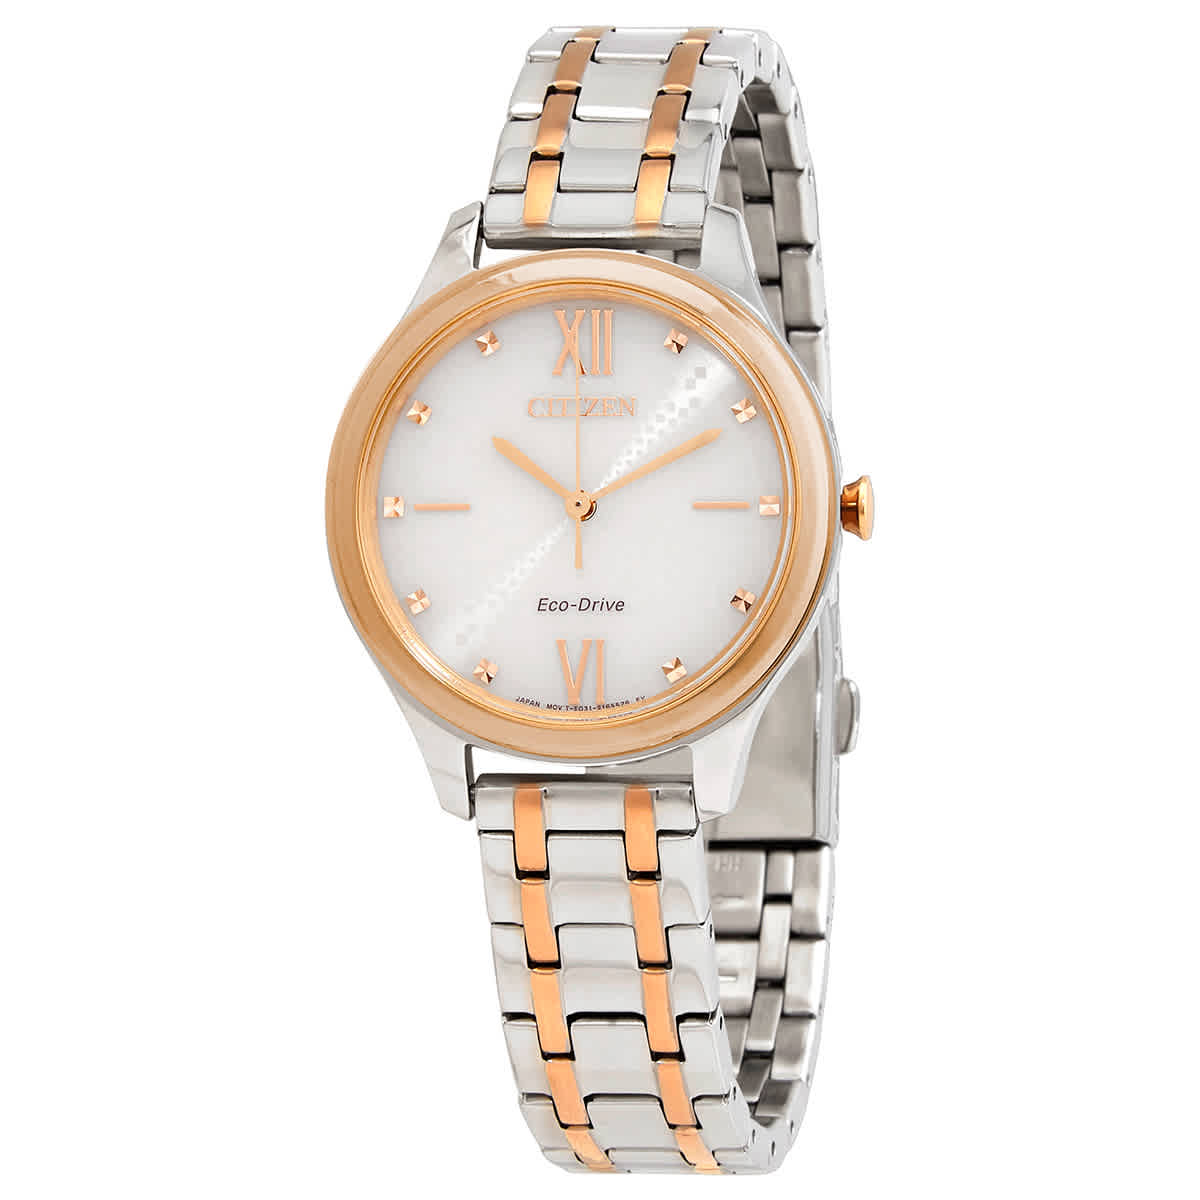 Citizen Eco-Drive Ivory Dial Two-tone Ladies Watch EM0506-77A - image 1 of 3